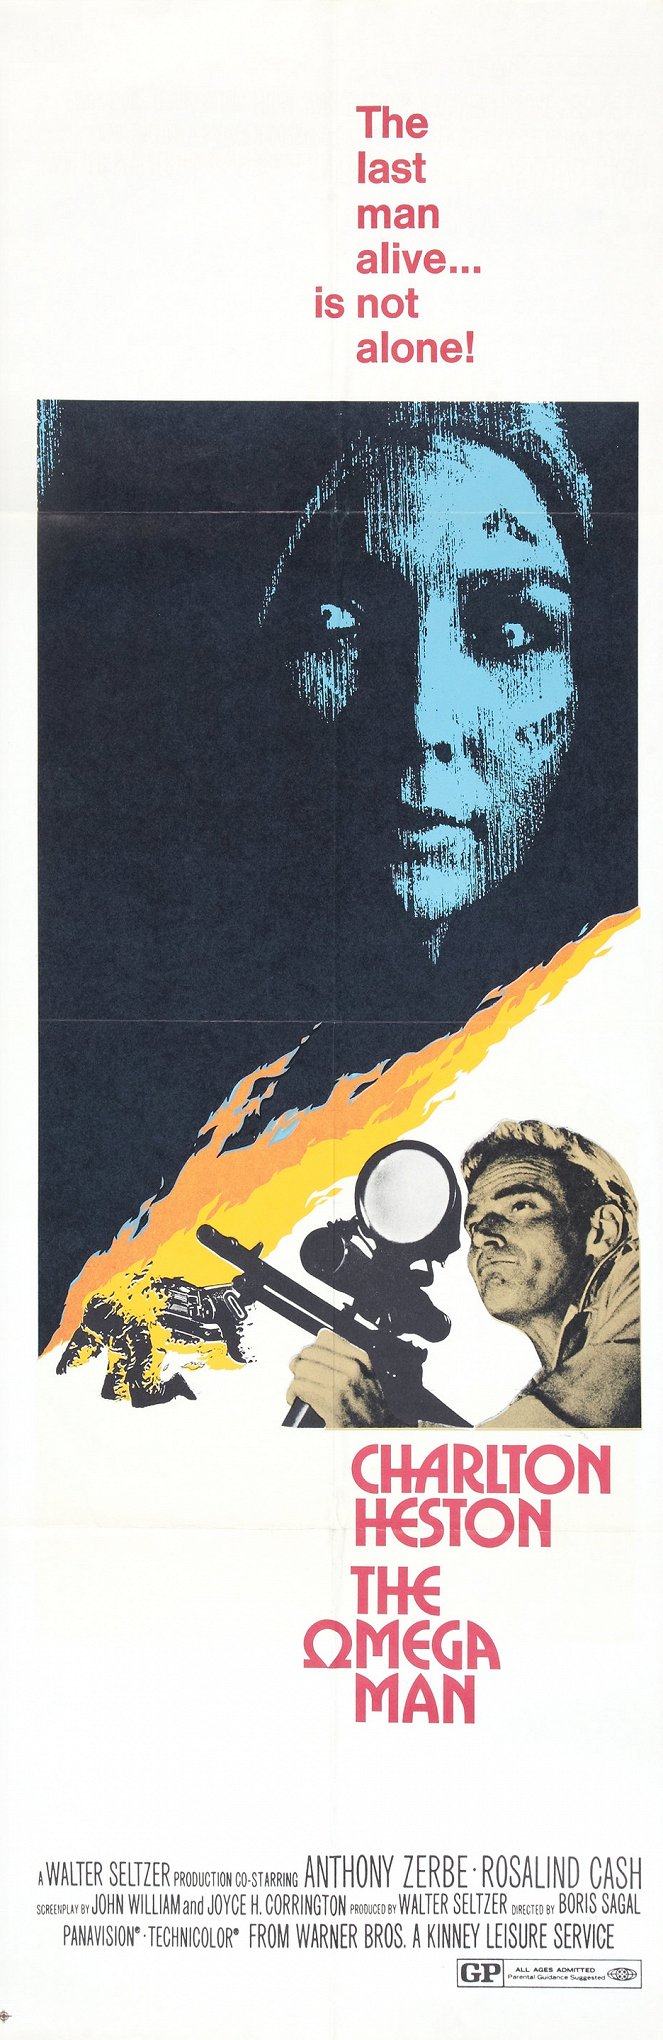 The Omega Man - Posters